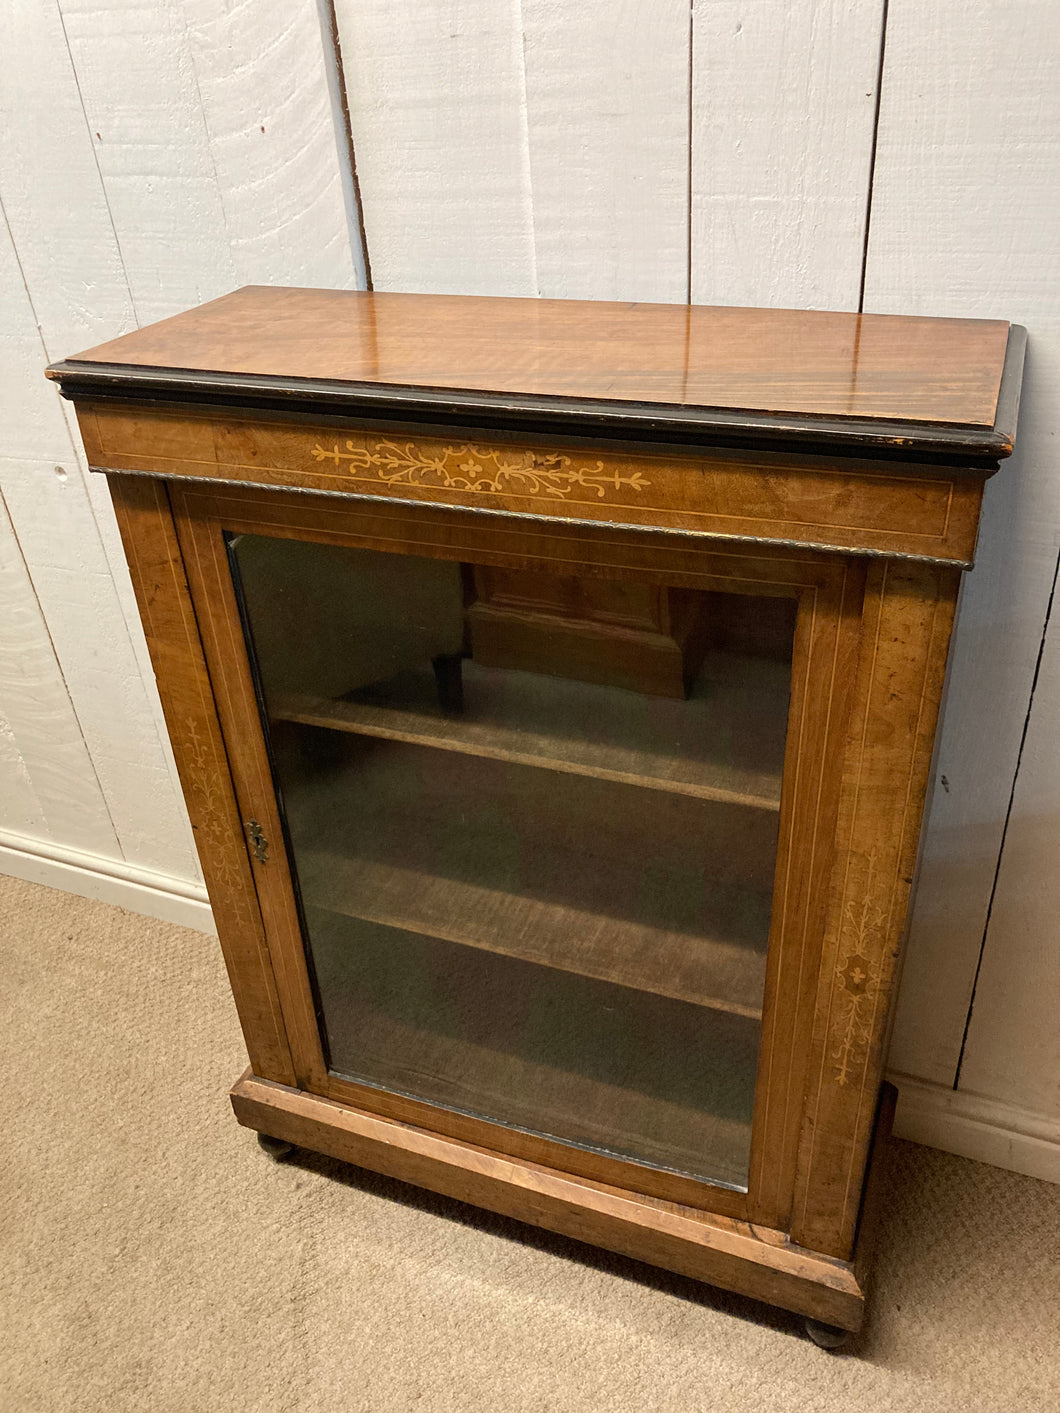 Edwardian Mahogany Inlaid Glazed Cabinet With Metal Trim Lined In Velour In Need Of Some TLC